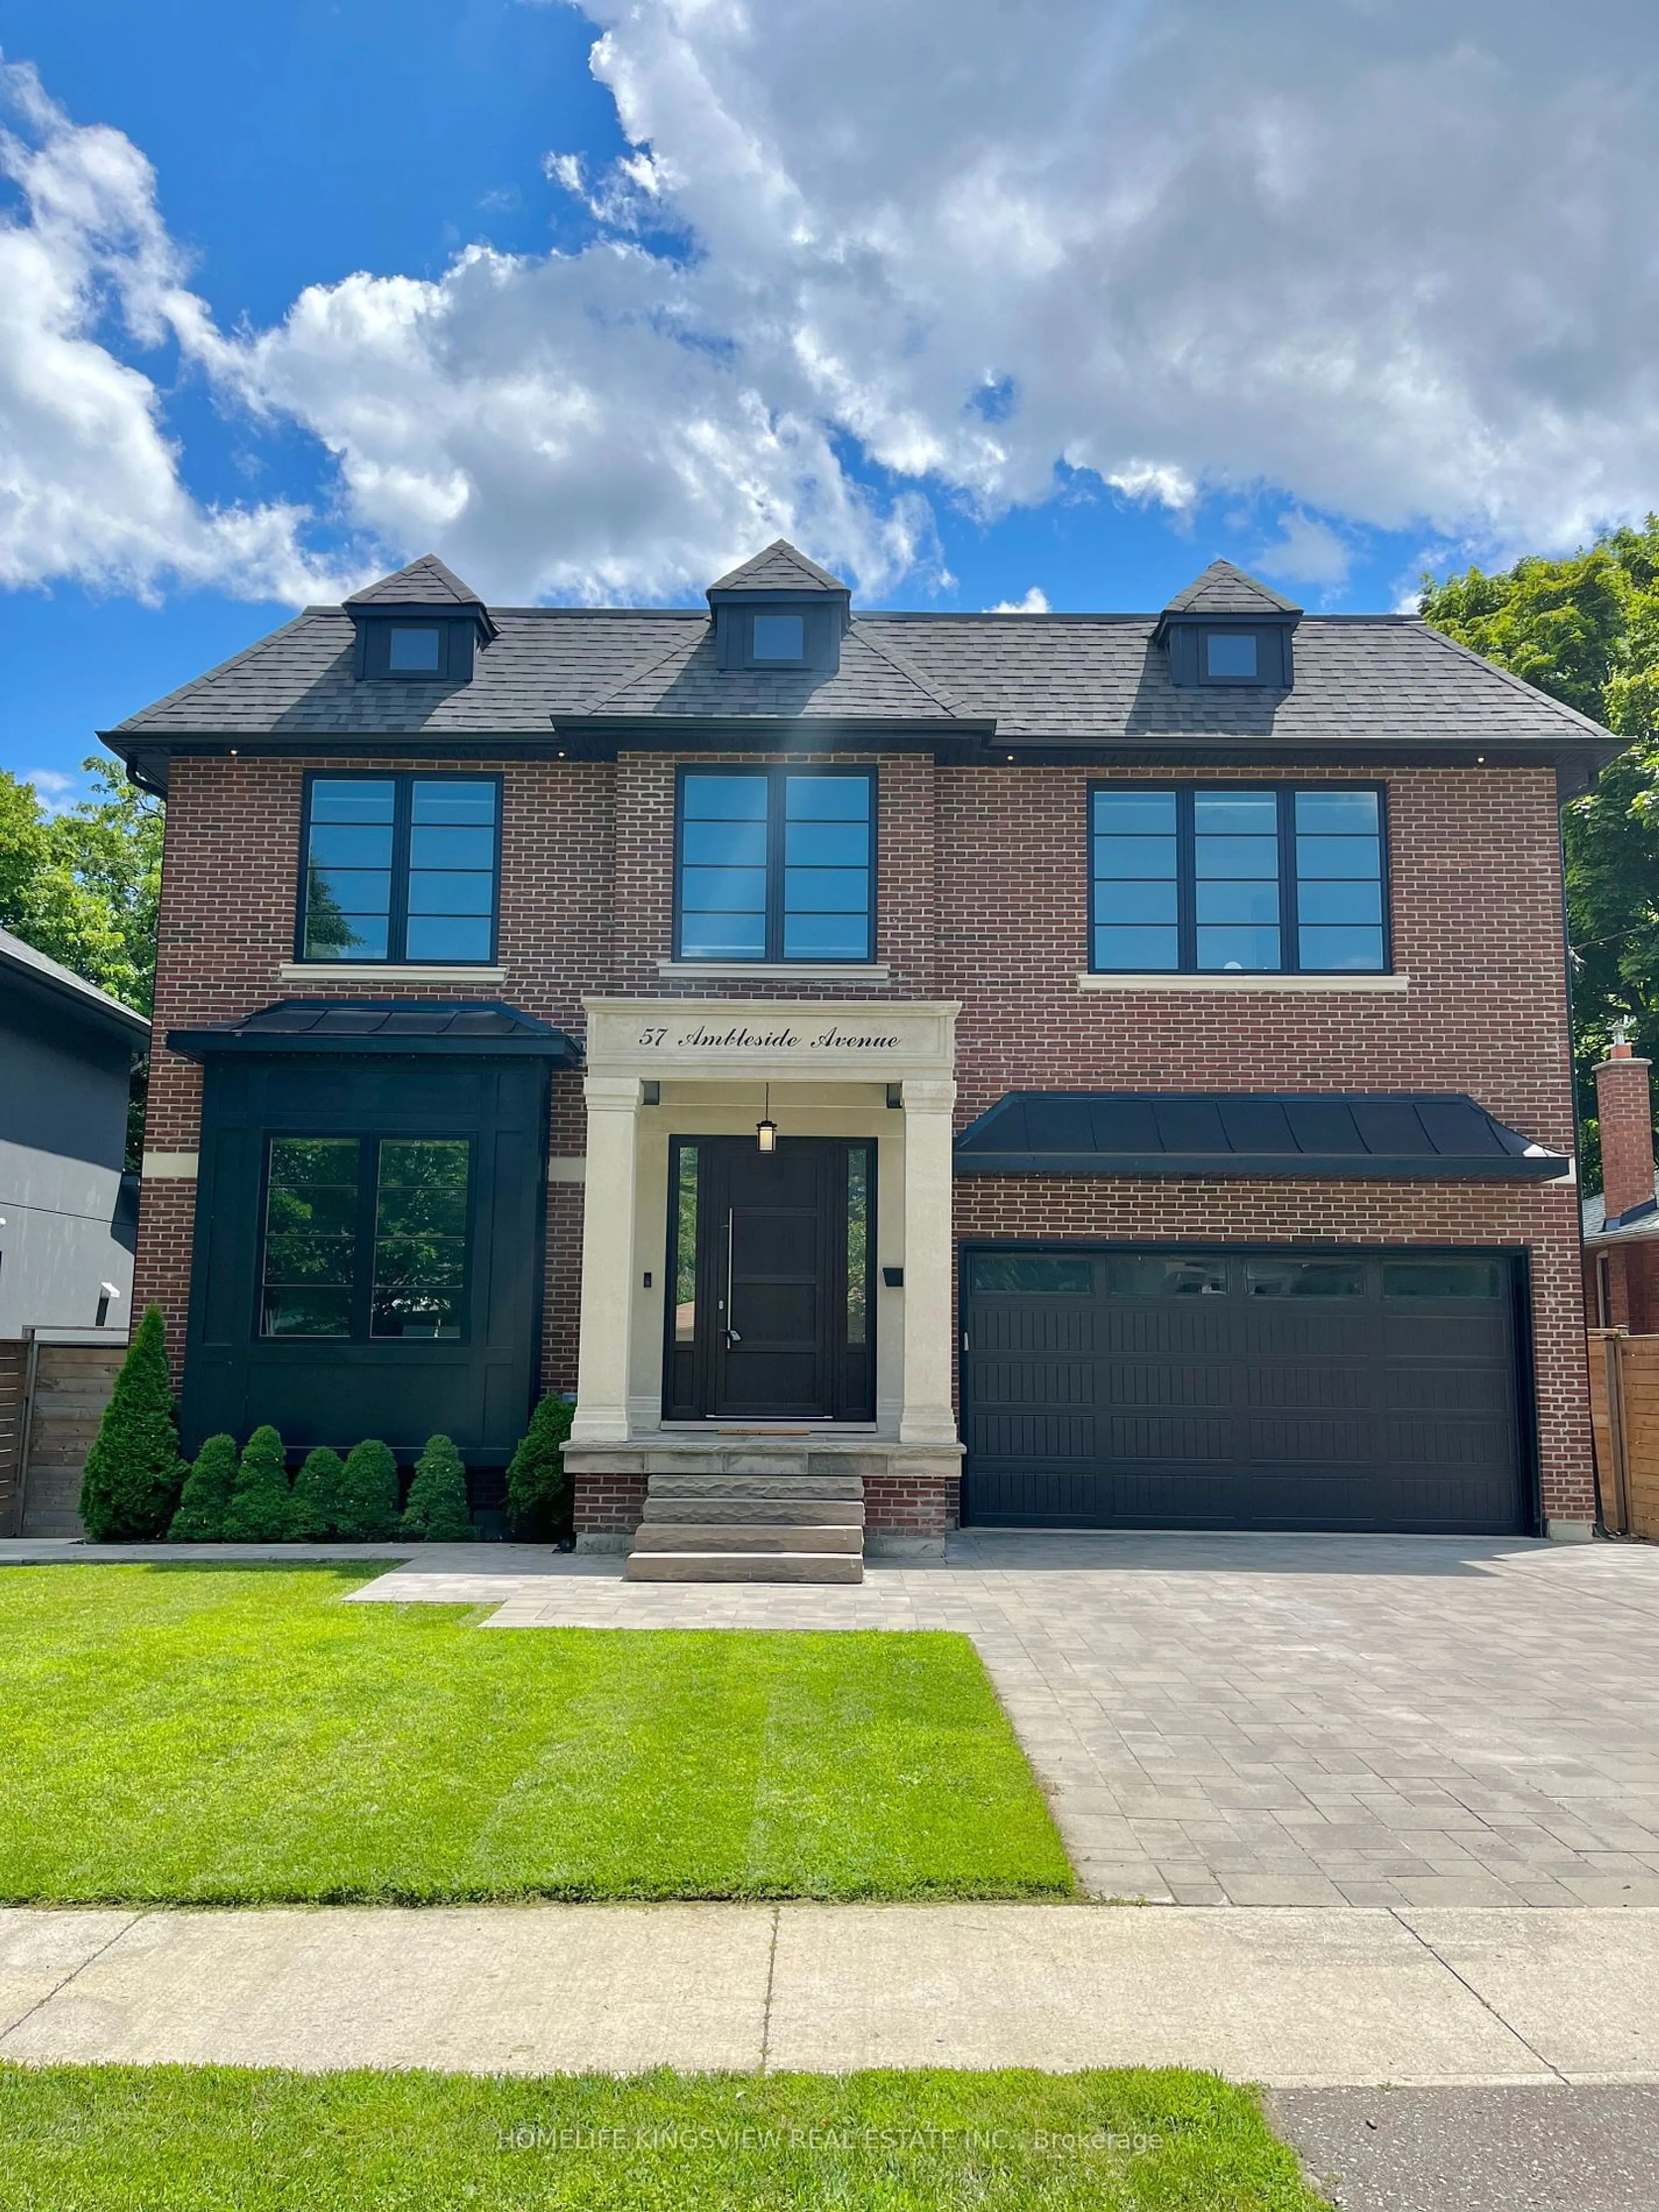 Home with brick exterior material for 57 Ambleside Ave, Toronto Ontario M8Z 2H8